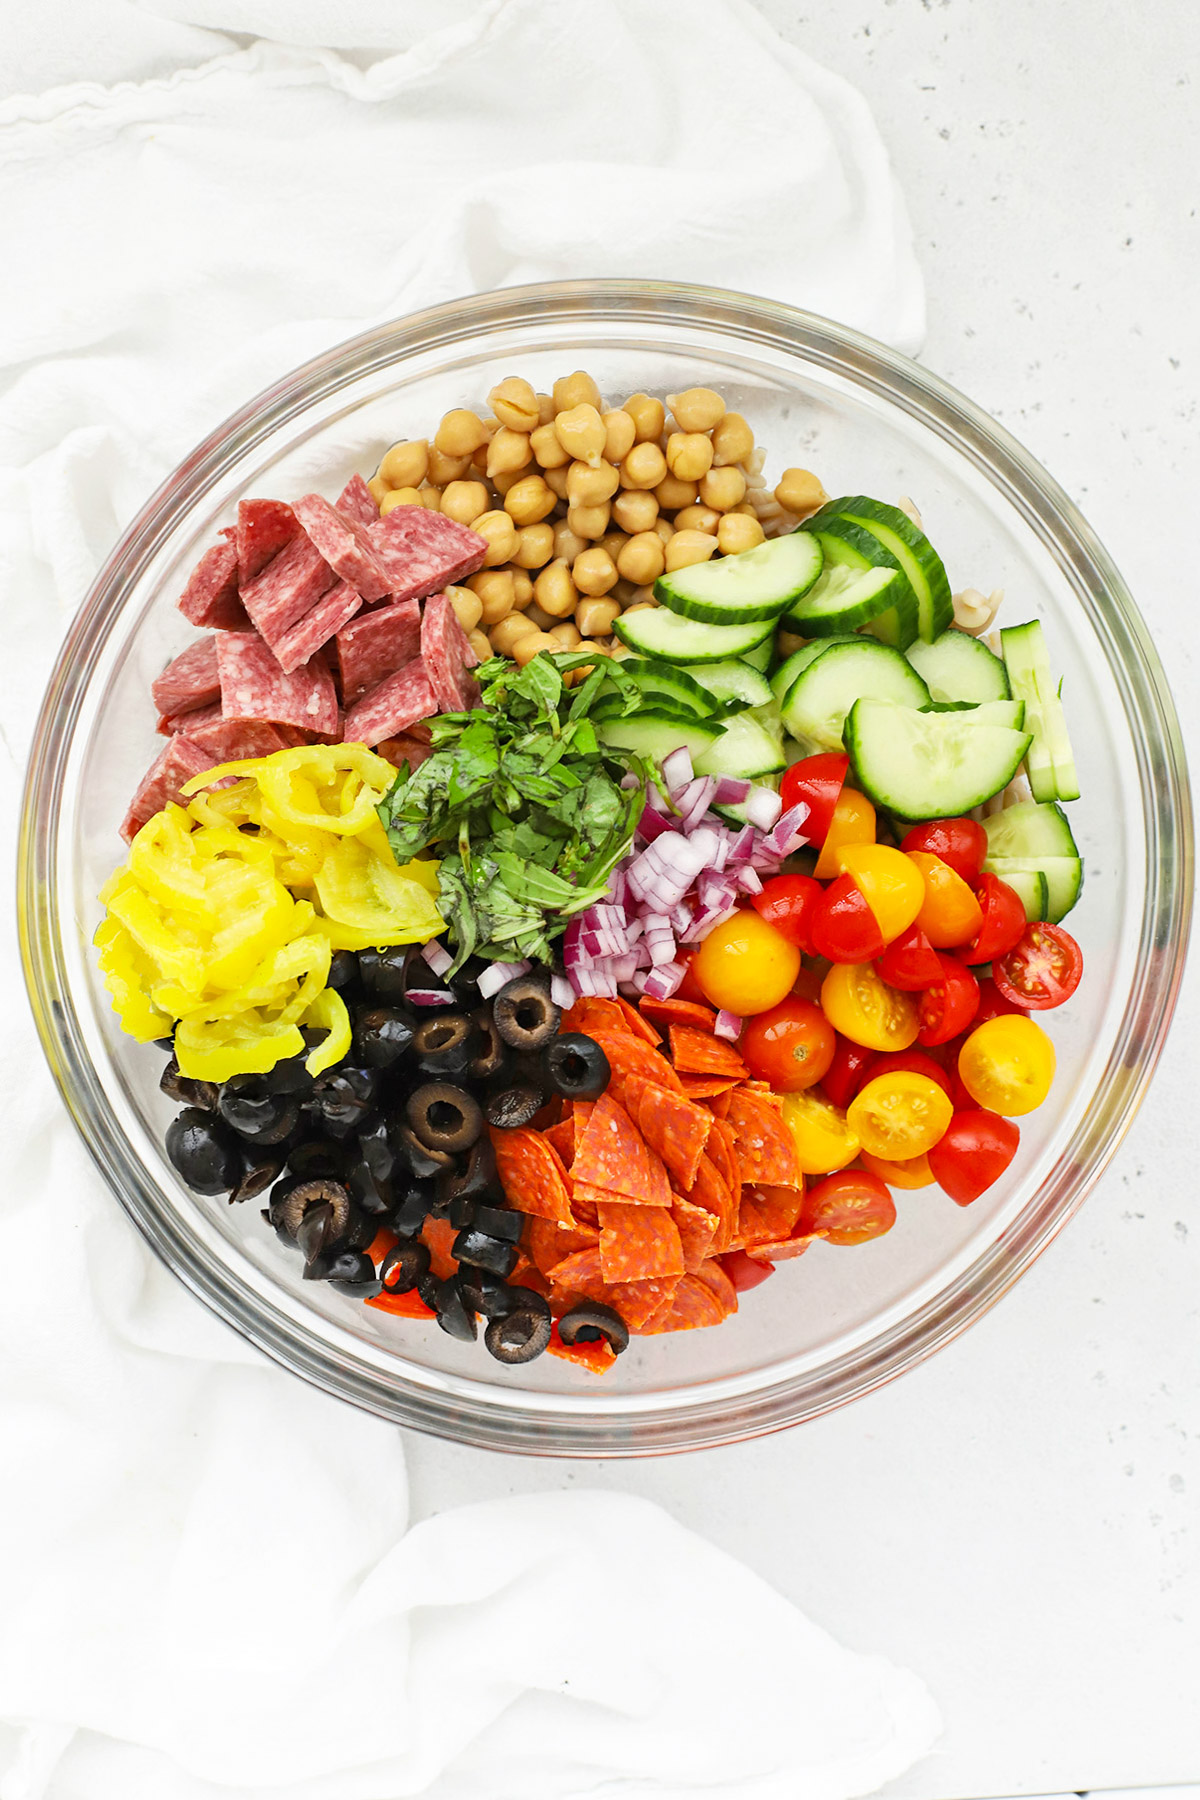 Overhead view of mix-ins added to gluten-free pasta to make gluten-free pasta salad